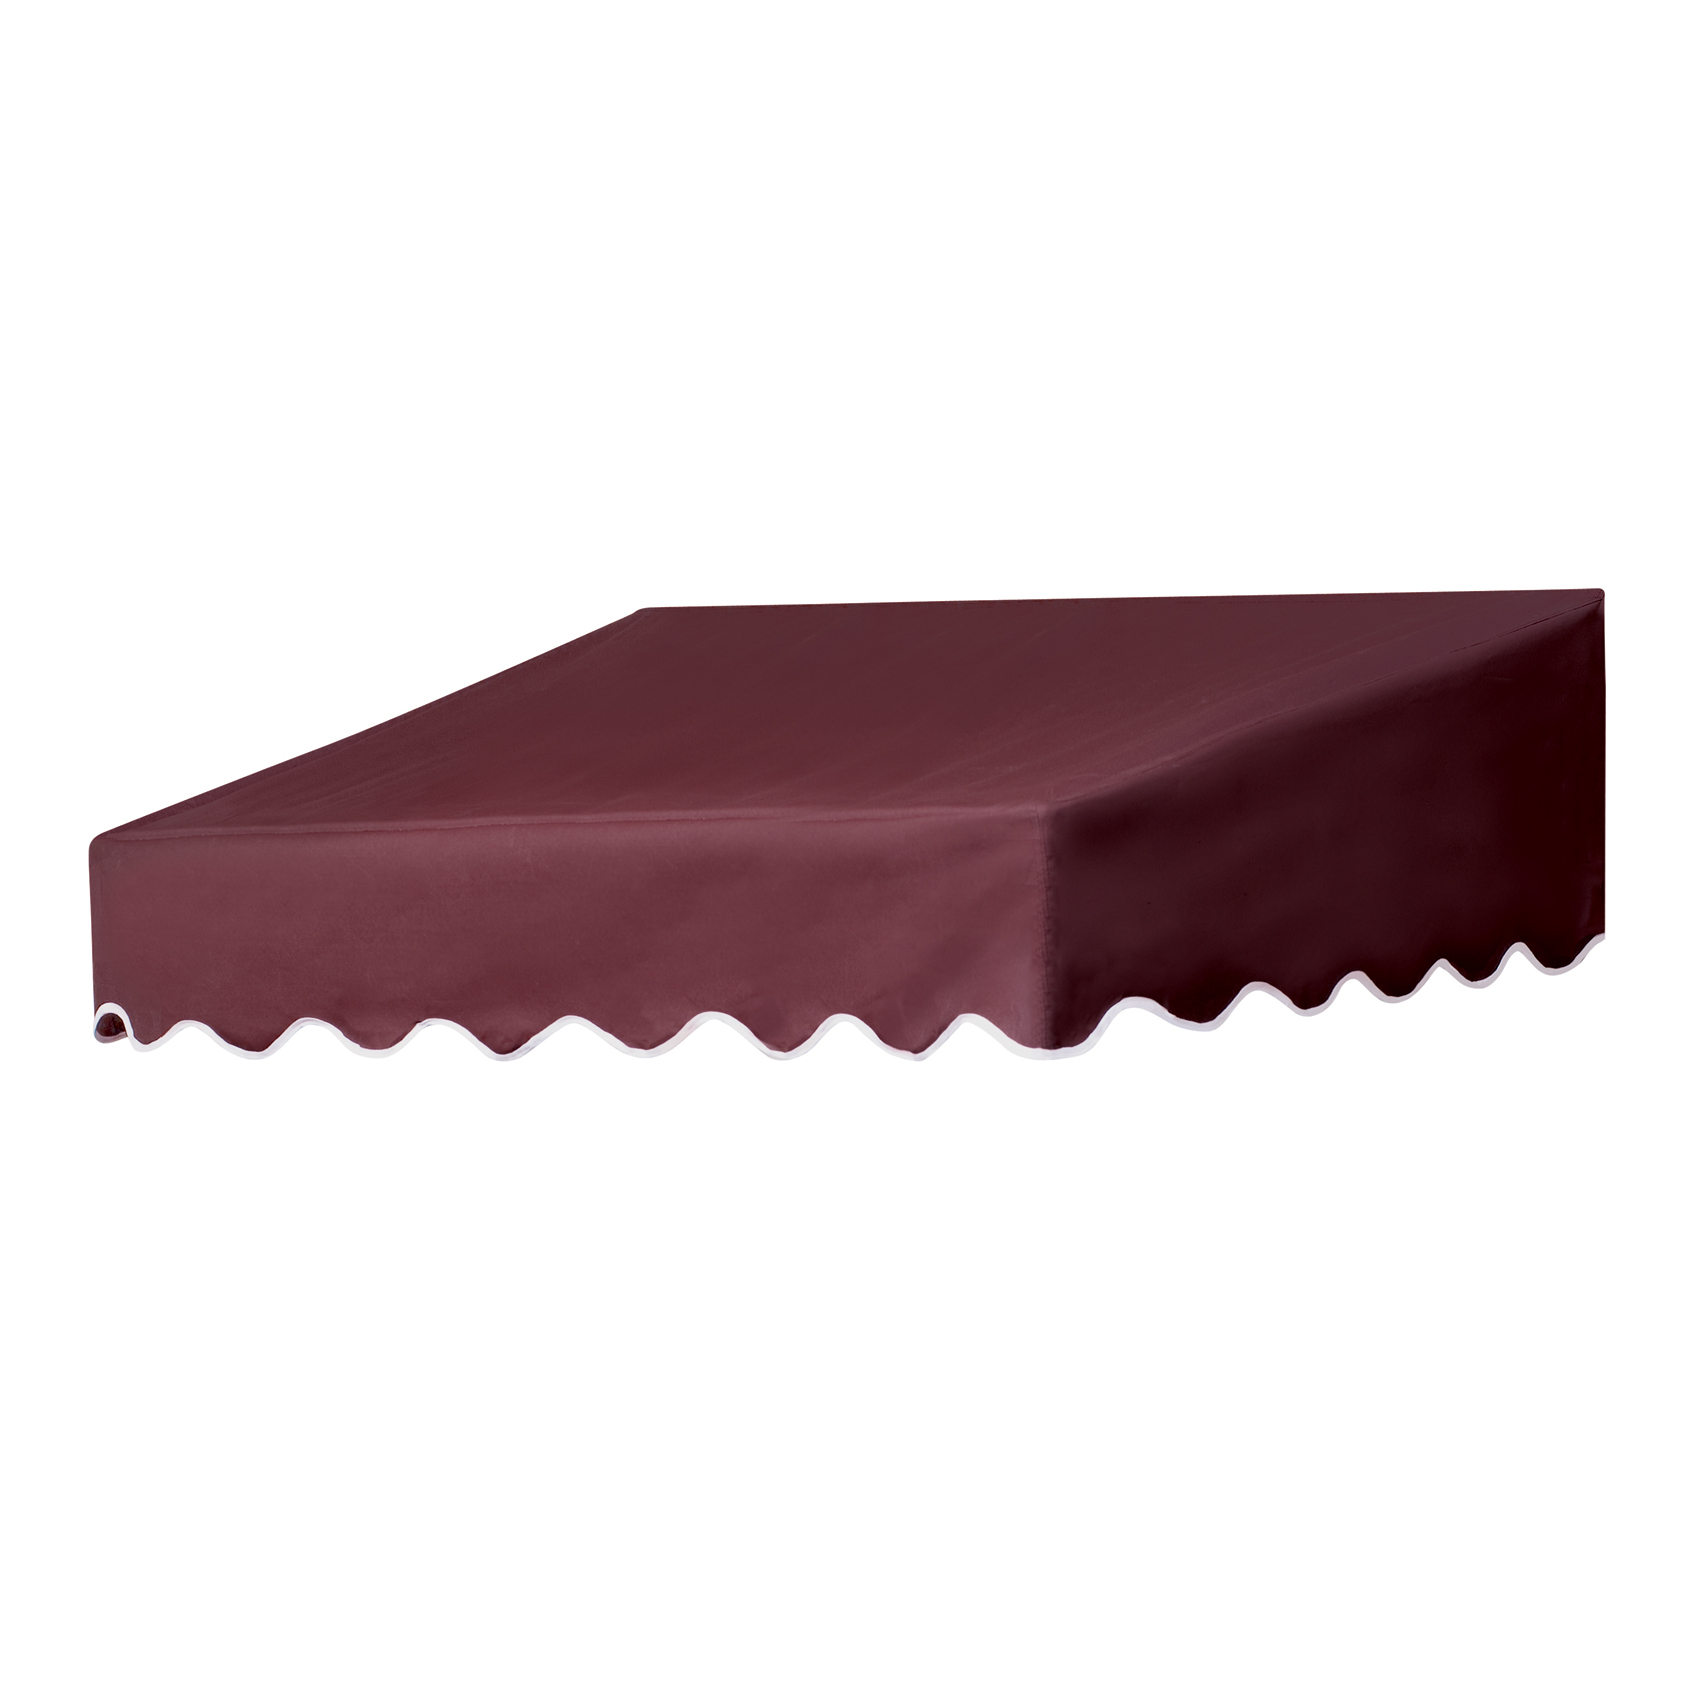 Door Canopy in a Box&reg; 4' Traditional Style Door Canopy Replacement Cover in Assorted Colors